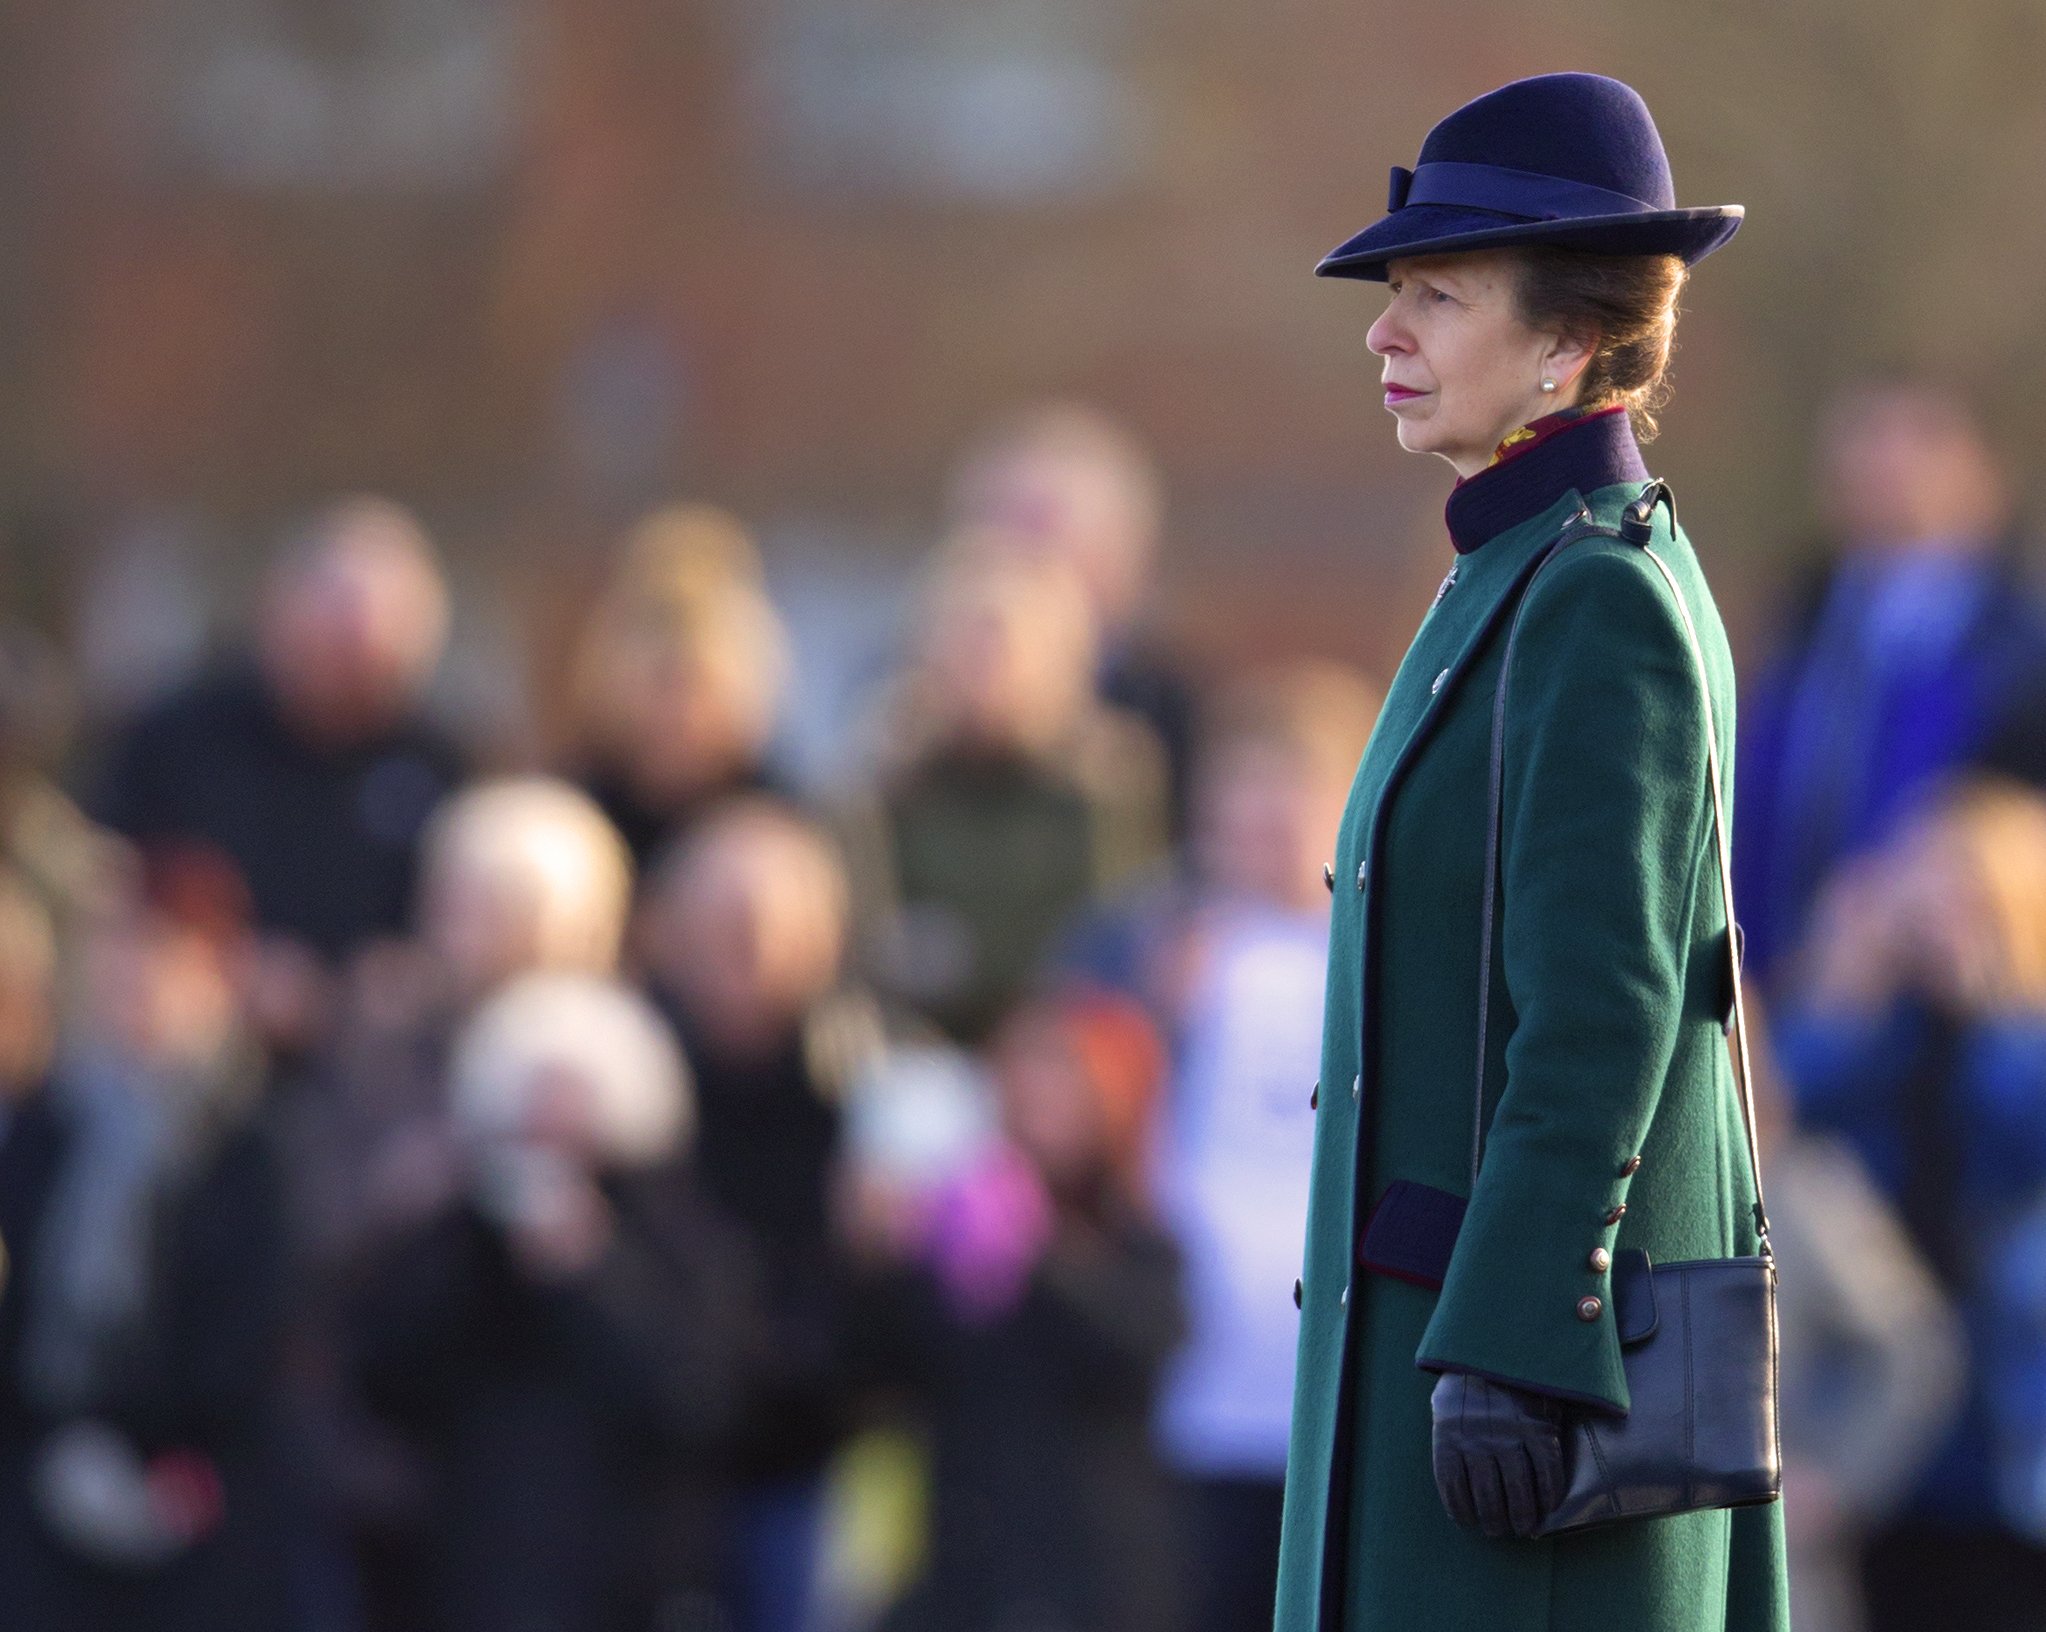 Princess Anne, The Princess Royal (in her role as Colonel-in-Chief of the King's Royal Hussars) takes the salute after presenting Afghanistan Operational Service Medals to Soldiers of The King's Royal Hussars at Aliwal Barracks on December 04, 2012 in Tidworth, England | Source: Getty Images 